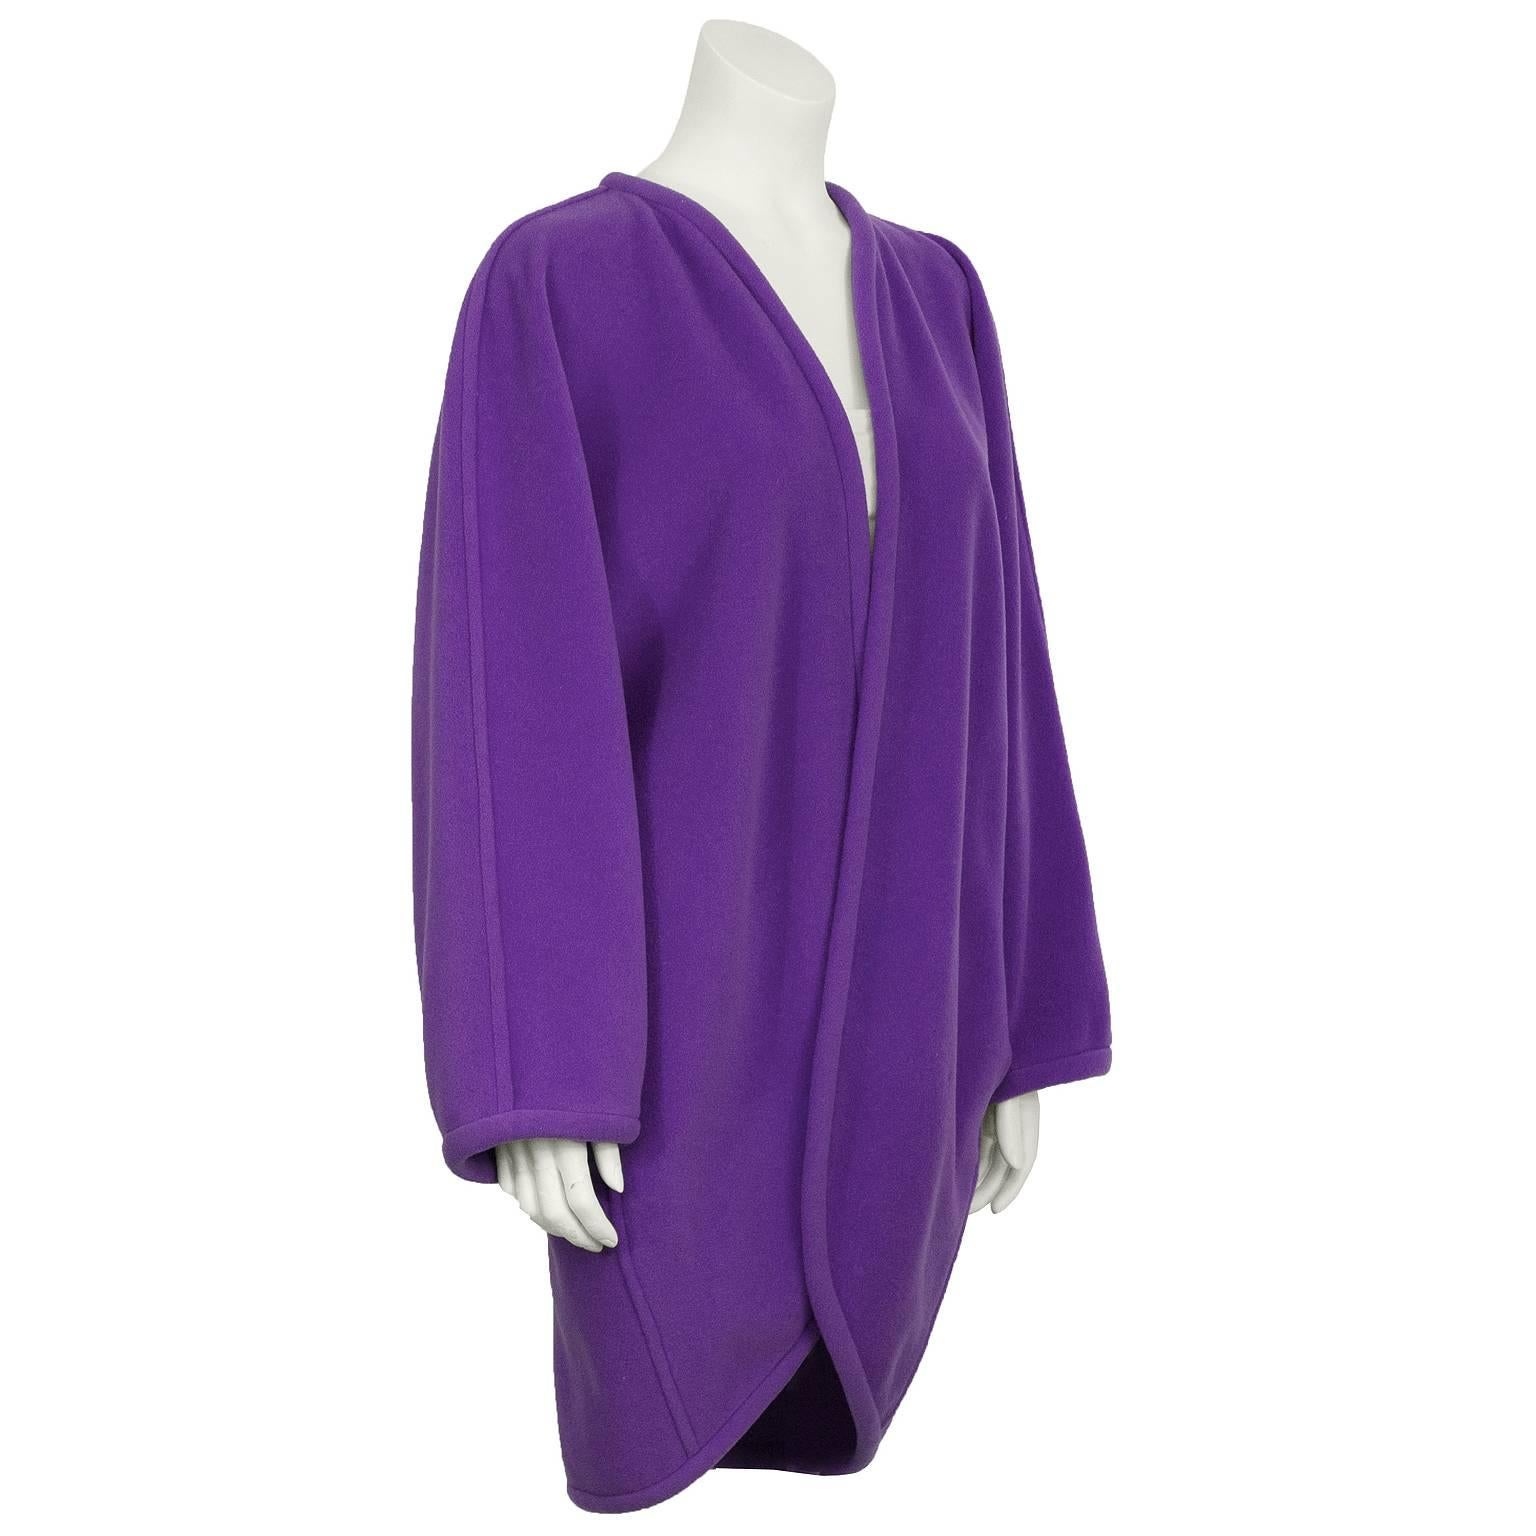 Ungaro felted wool purple oversized cocoon jacket from the 1980’s. The jacket featured a rolled detail along the trimmed edge and the cuffs. Similar detail on the seams from the shoulder down to the cuffs and down the back. Two slit pockets on the